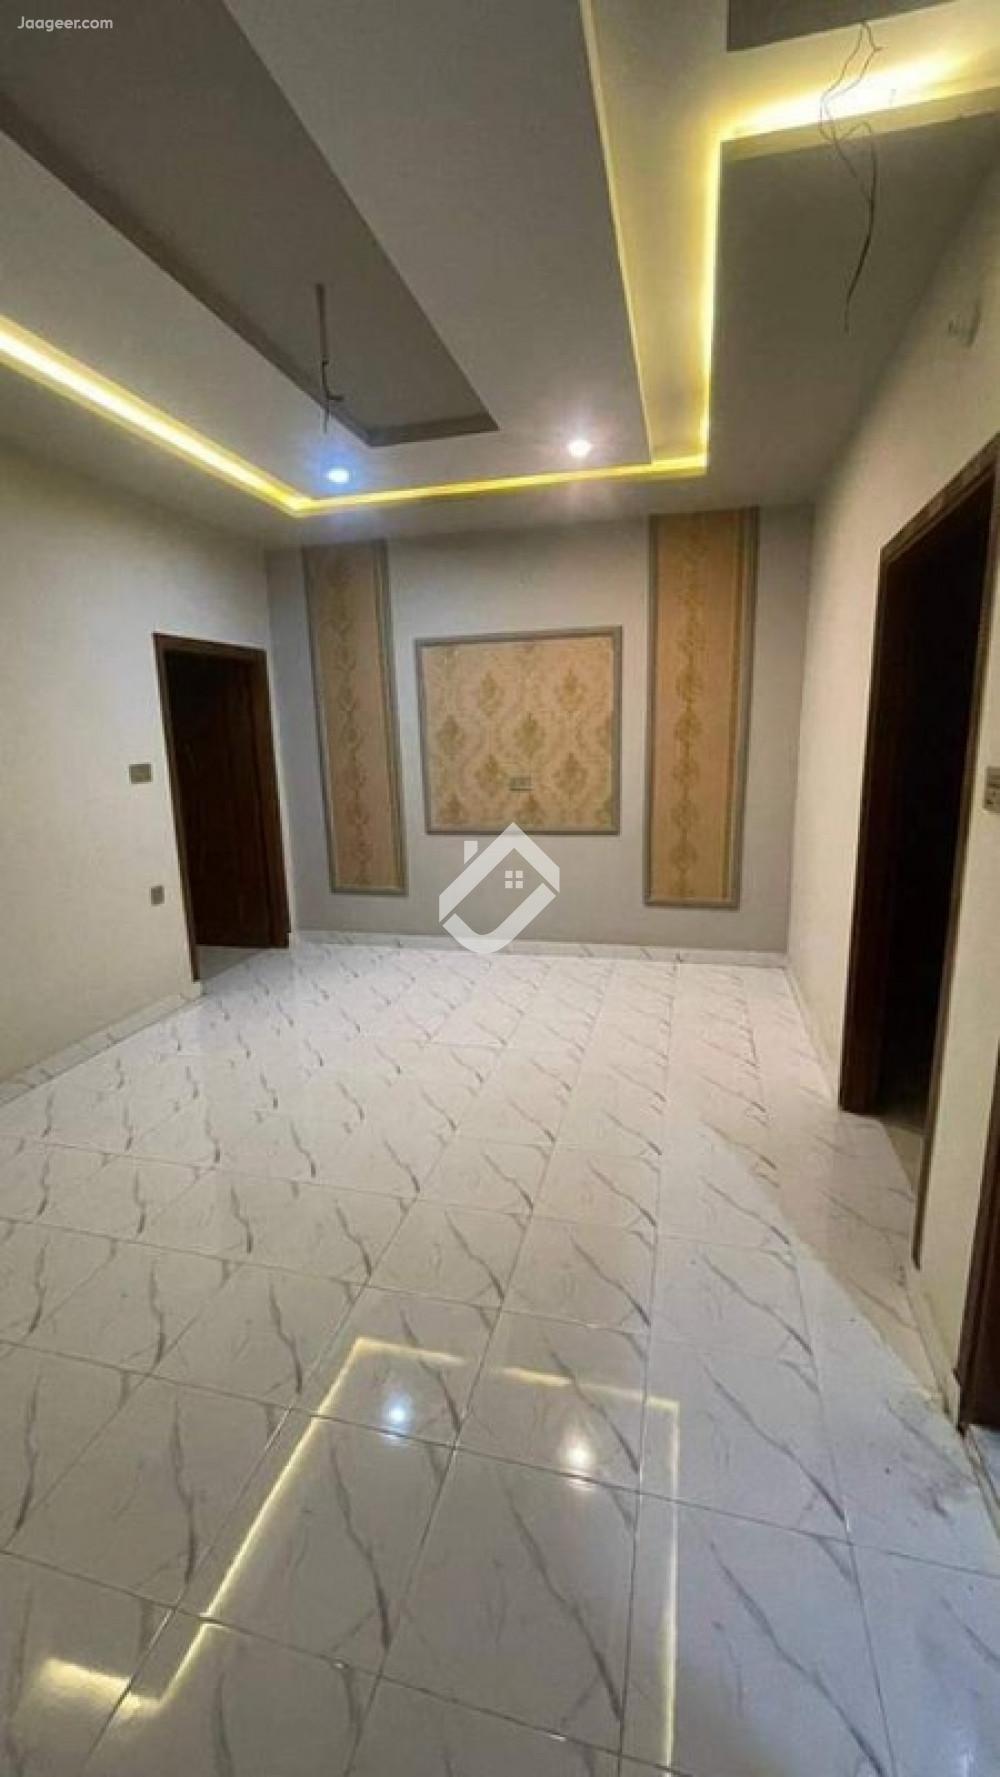 Main image 3 Marla Double Storey House For Sale In Waris Town Faisalabad Road Phase-2 Waris Town, Sargodha